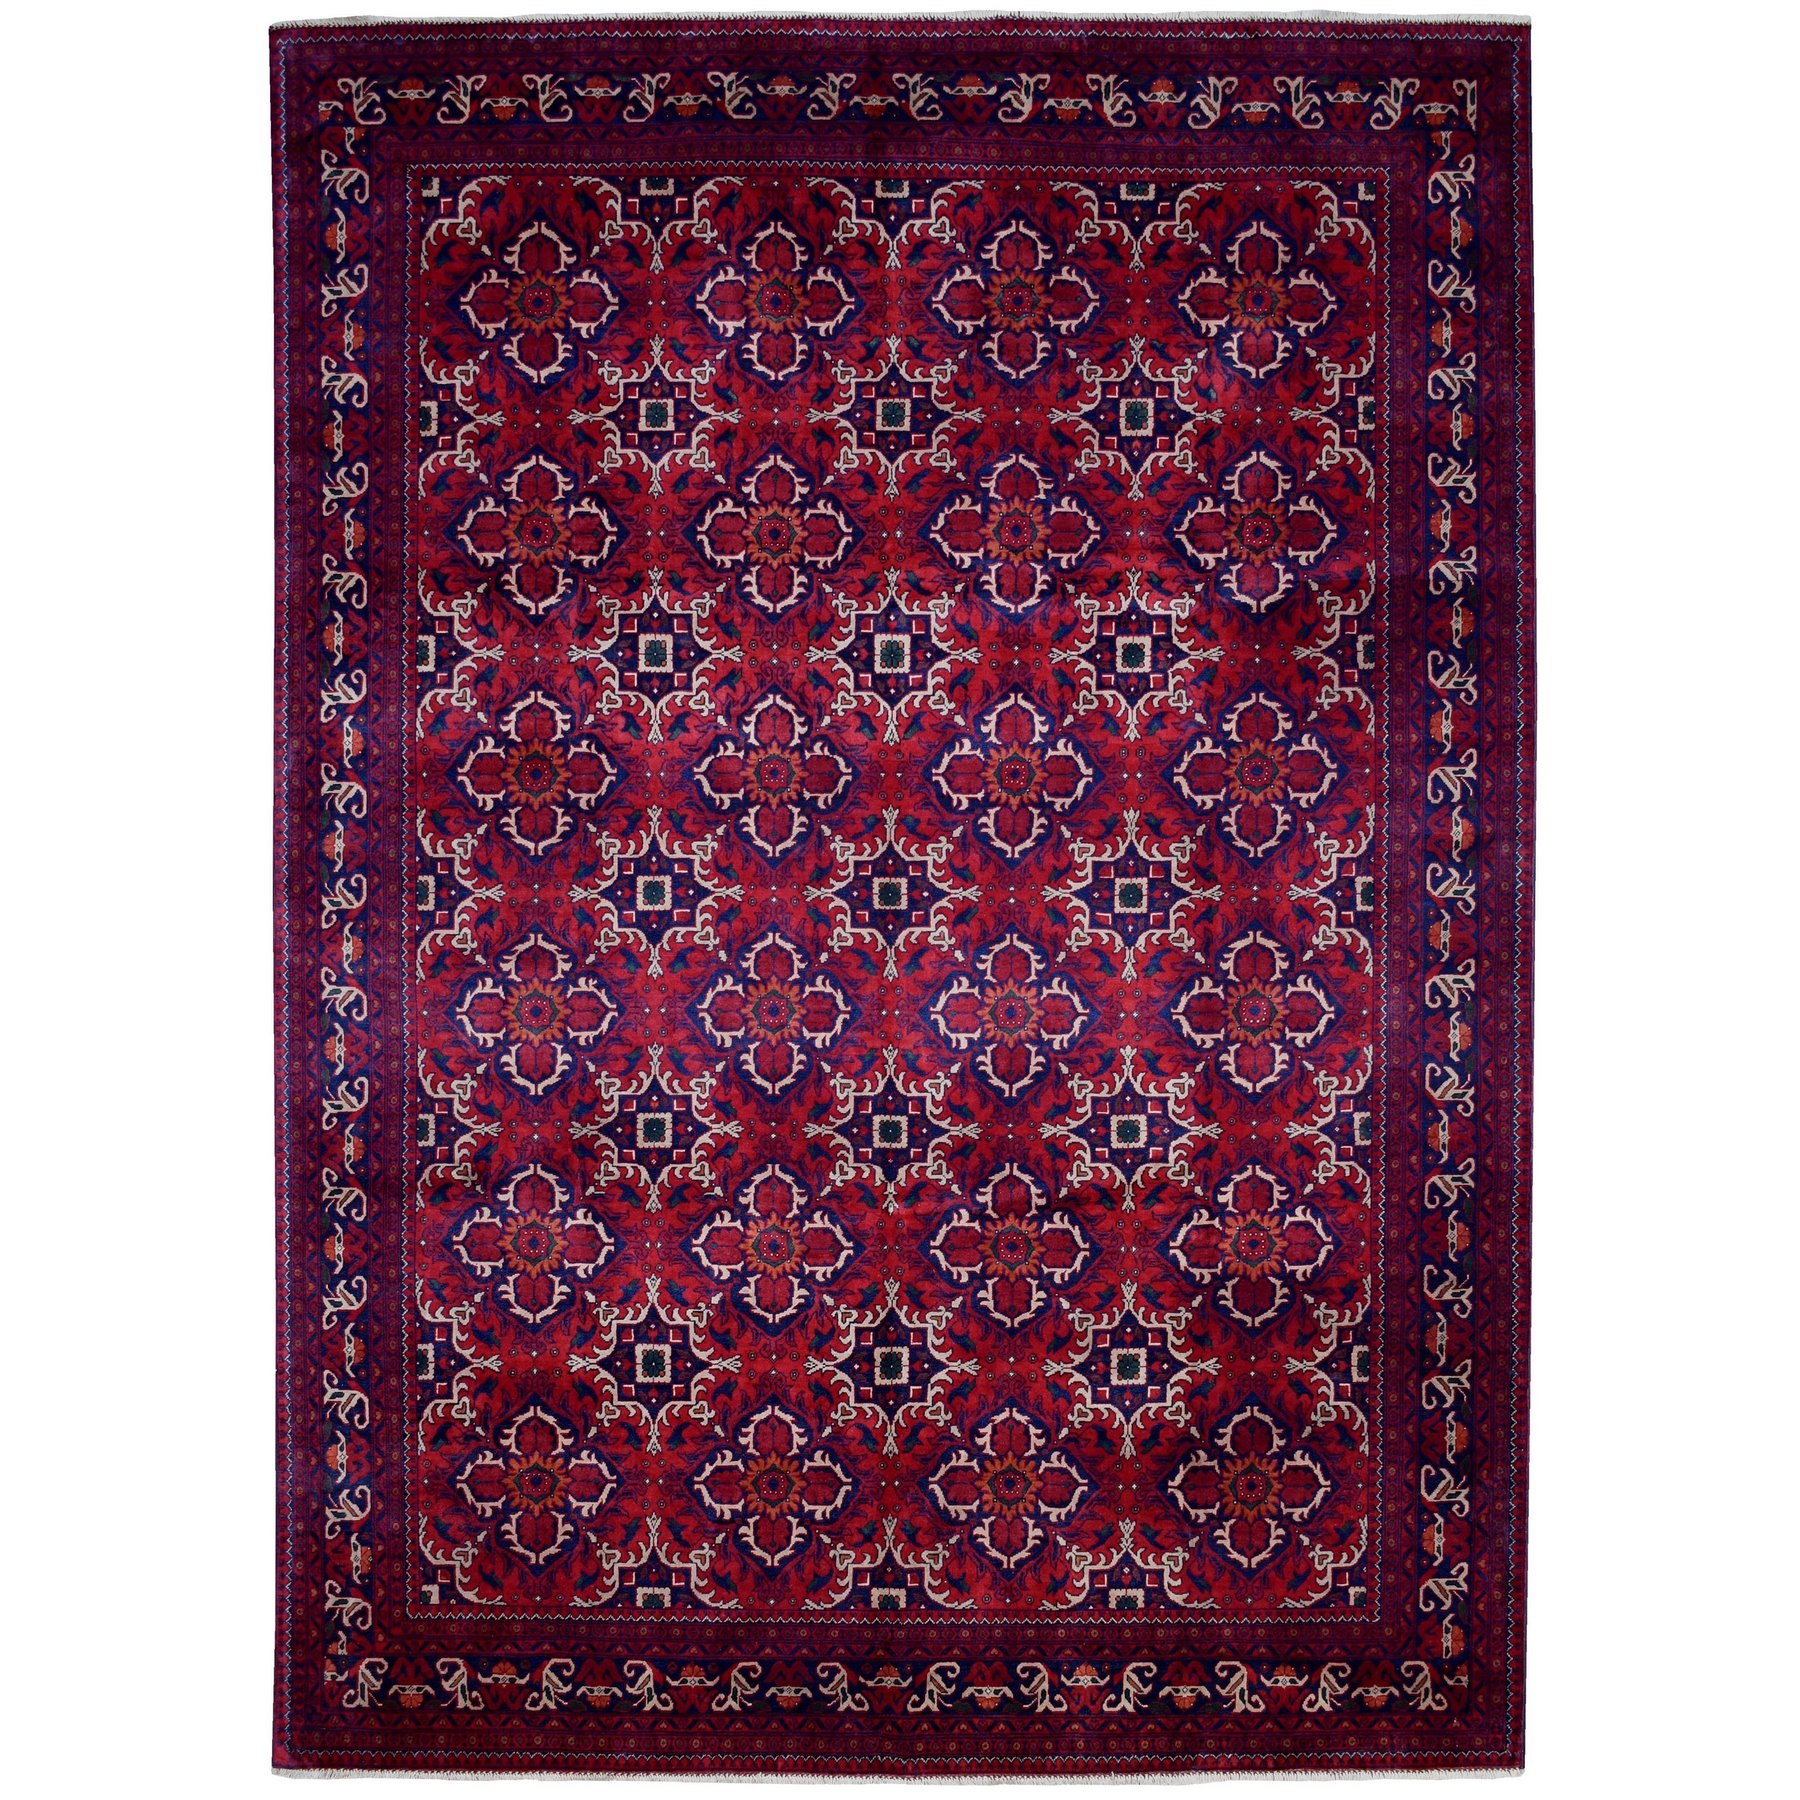 8'2"x11'3" Hand Woven Deep Saturated Red Afghan Khamyab with Denser Weave with Shiny Wool Oriental Rug 